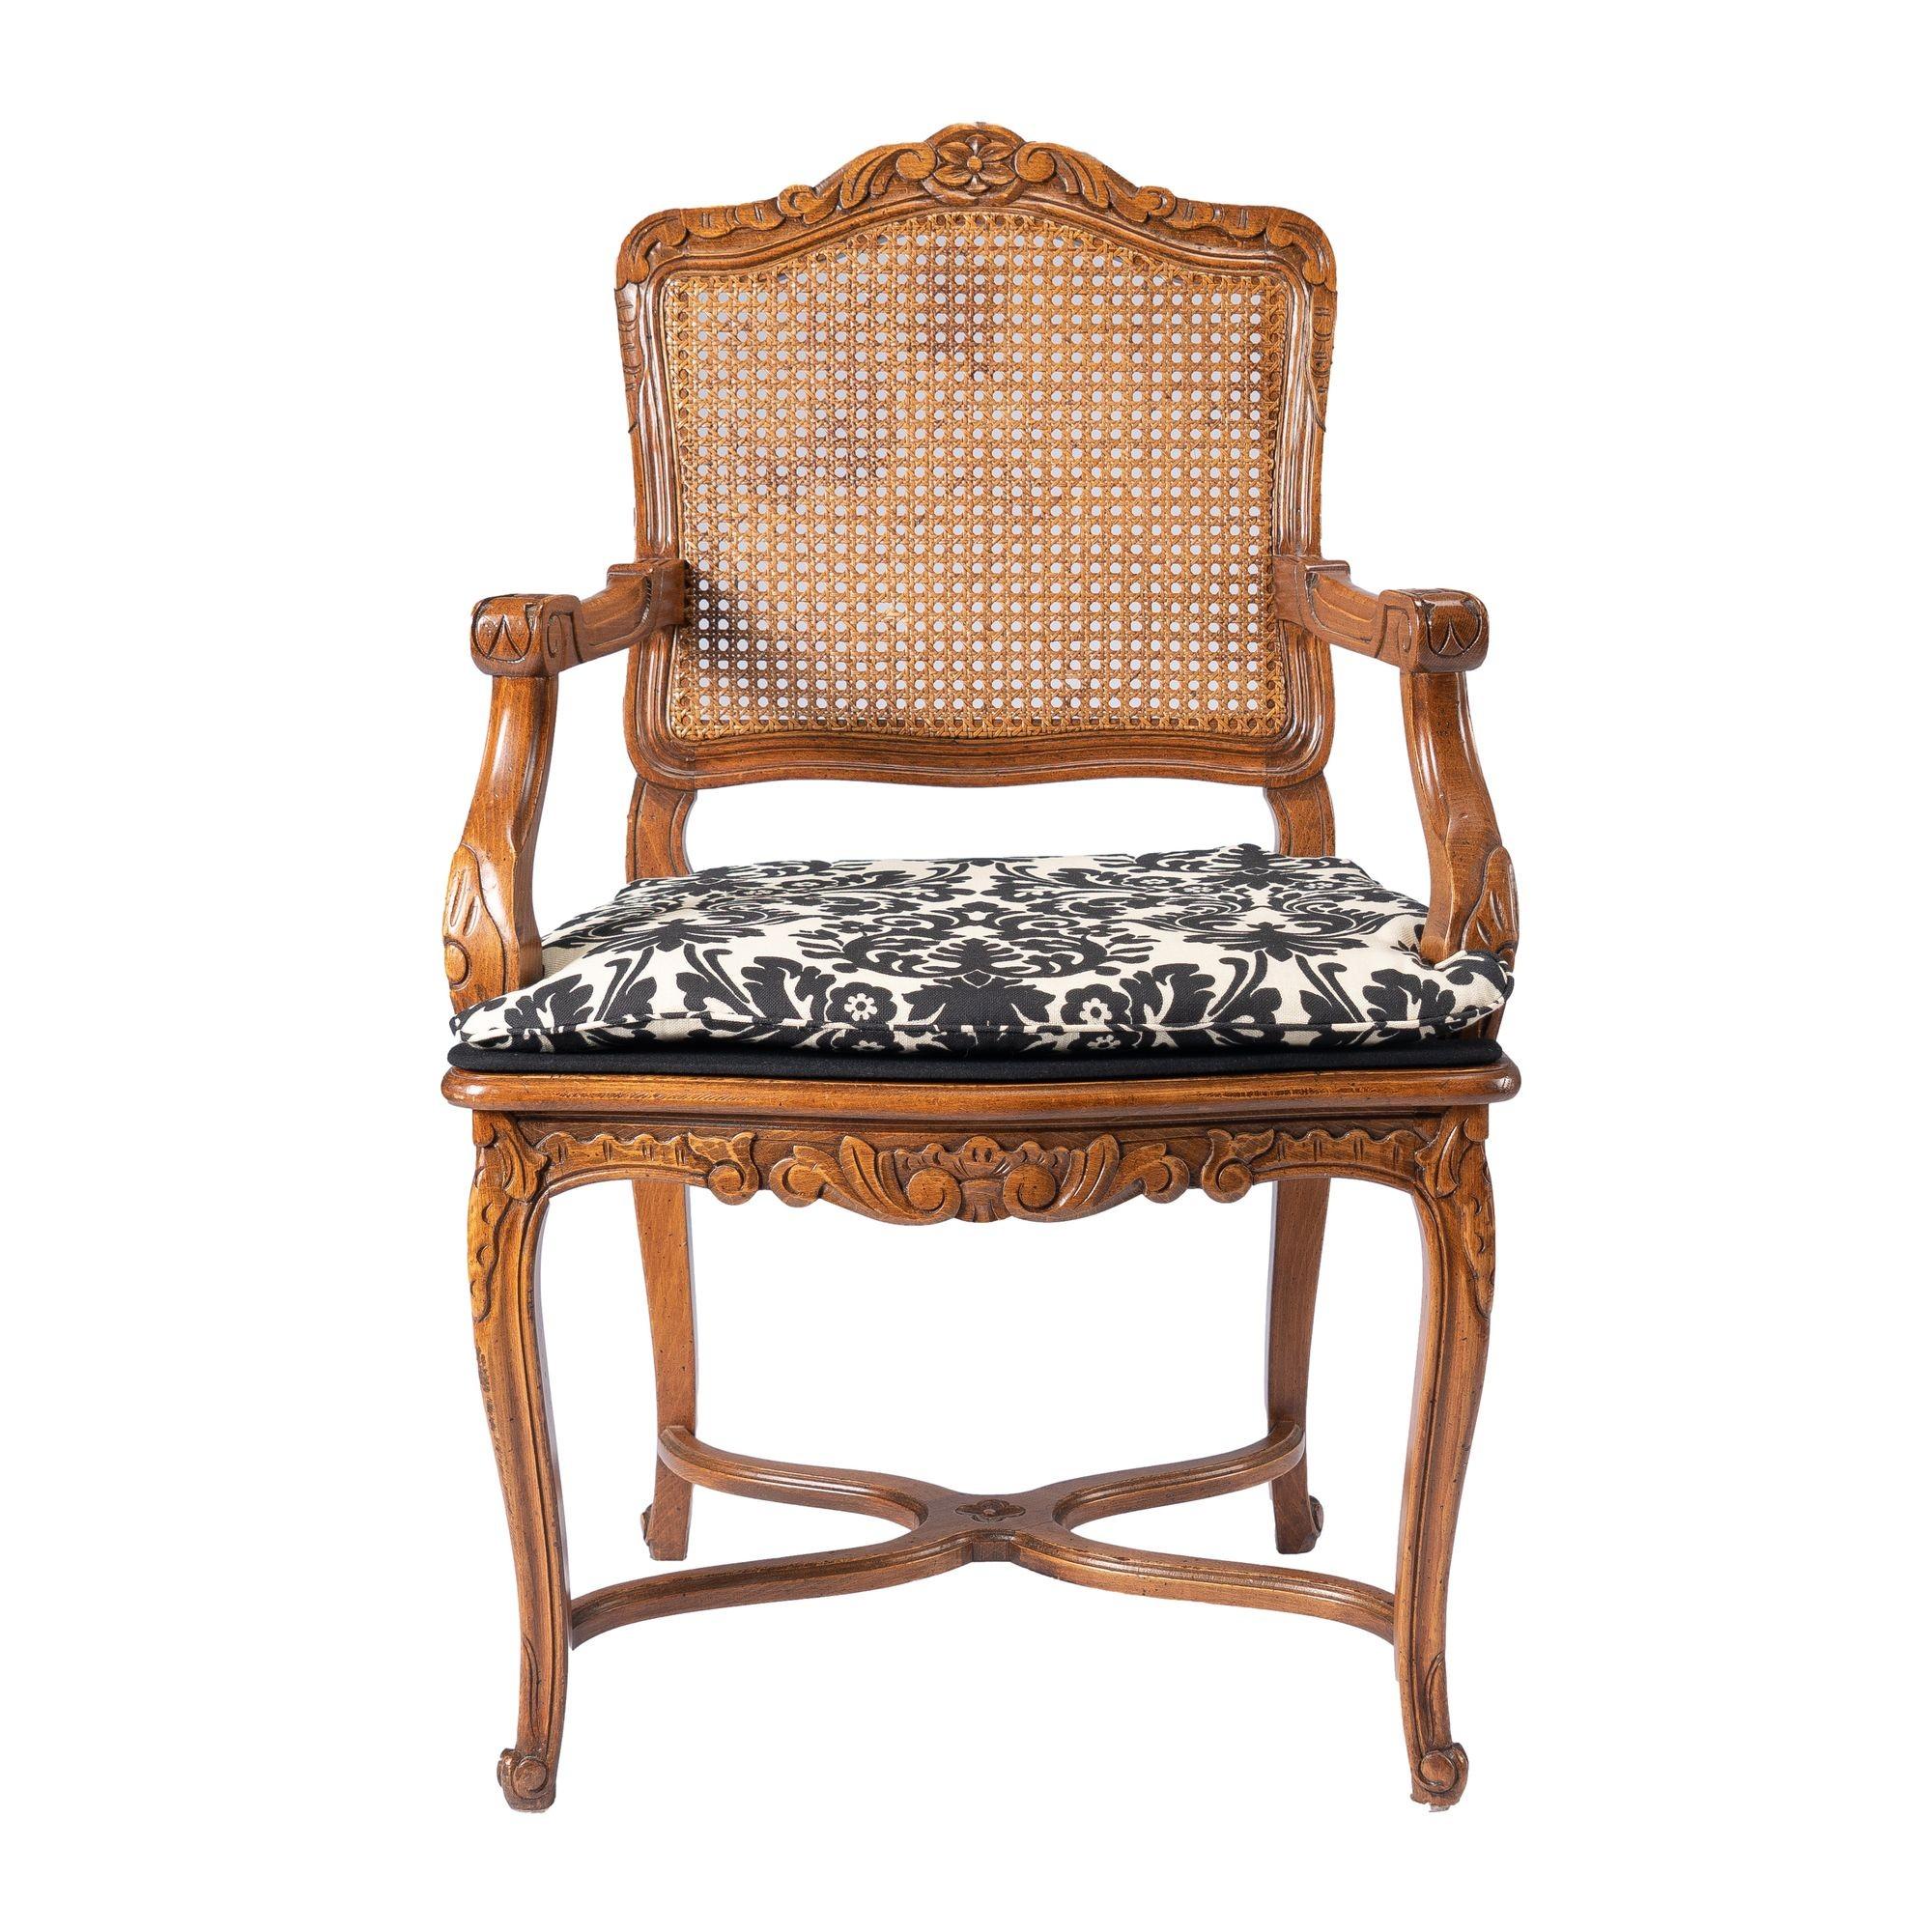 French Louis XVl style fauteuil, c. 1900's For Sale 3